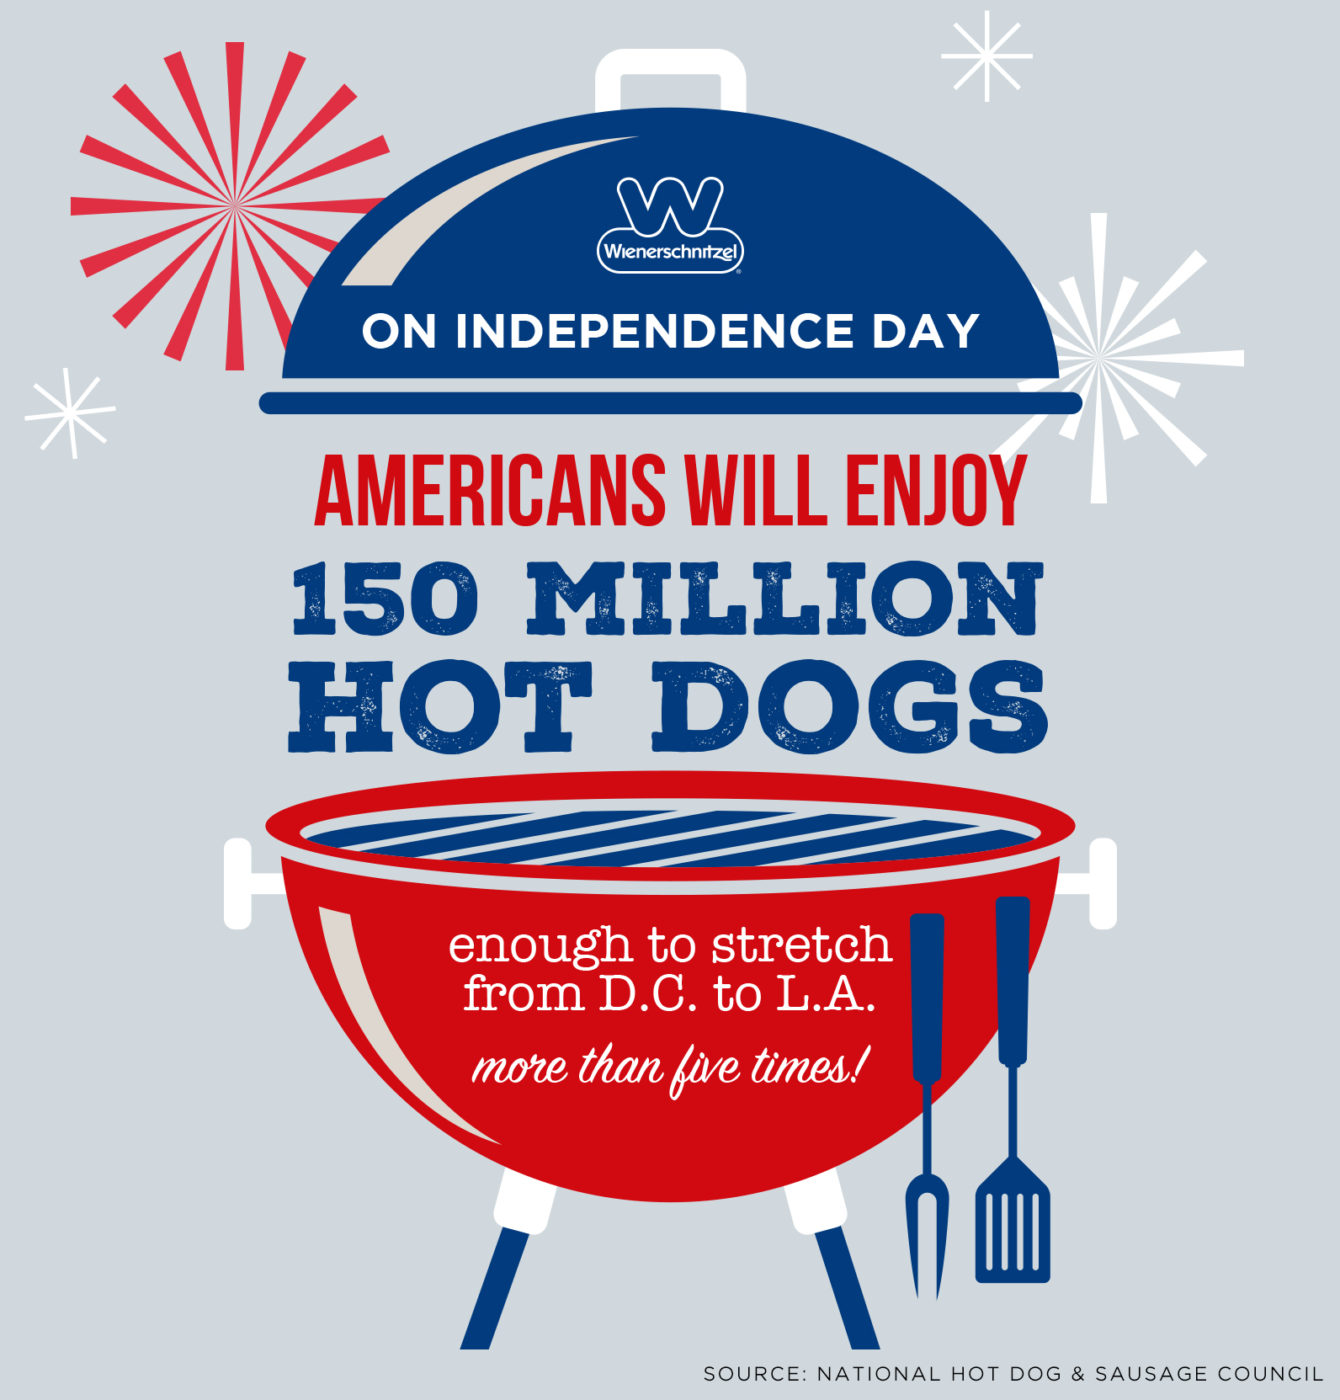 Wienerschnitzel hot dog franchise infographic stating Americans will enjoy 150 million hot dogs on Independence Day